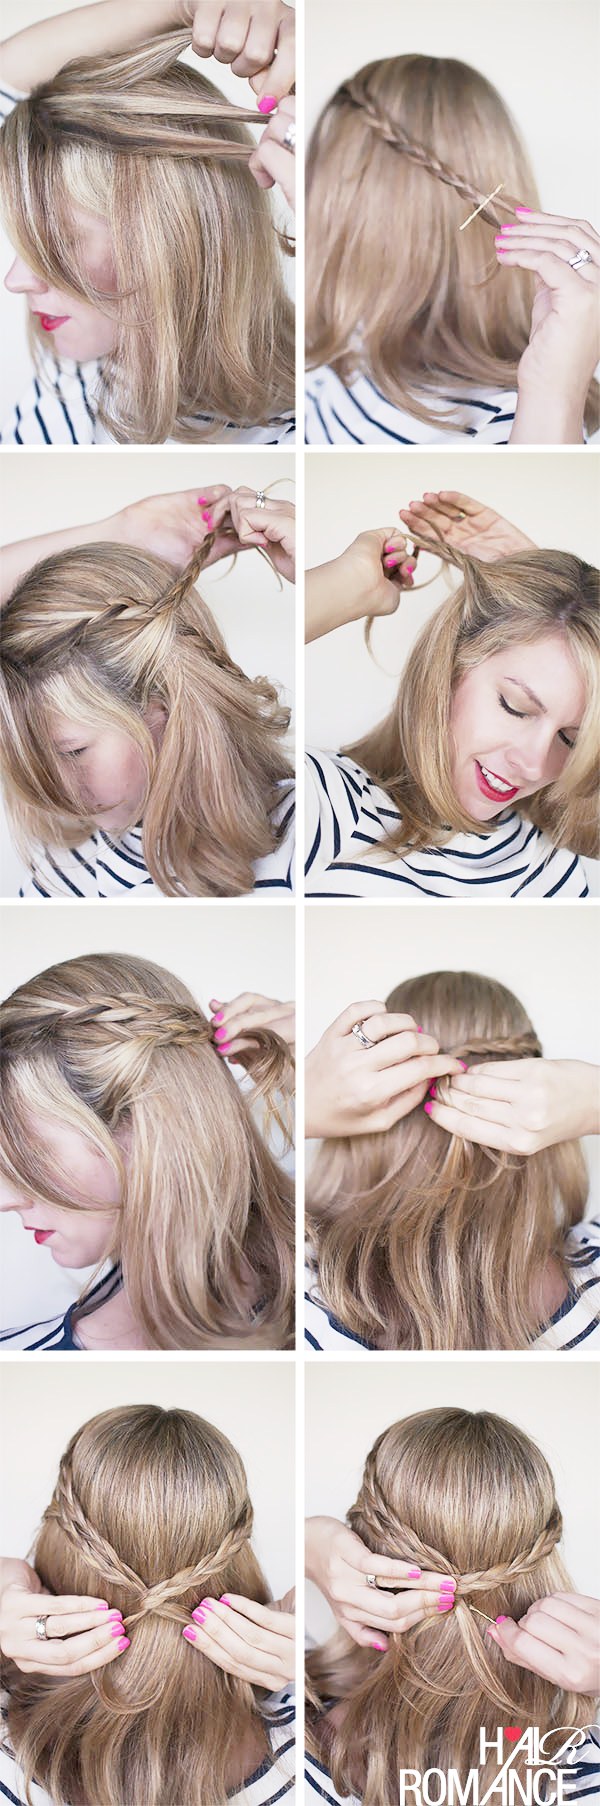 Easy Hairstyles For Long Hair Tied Up The triple tied braid